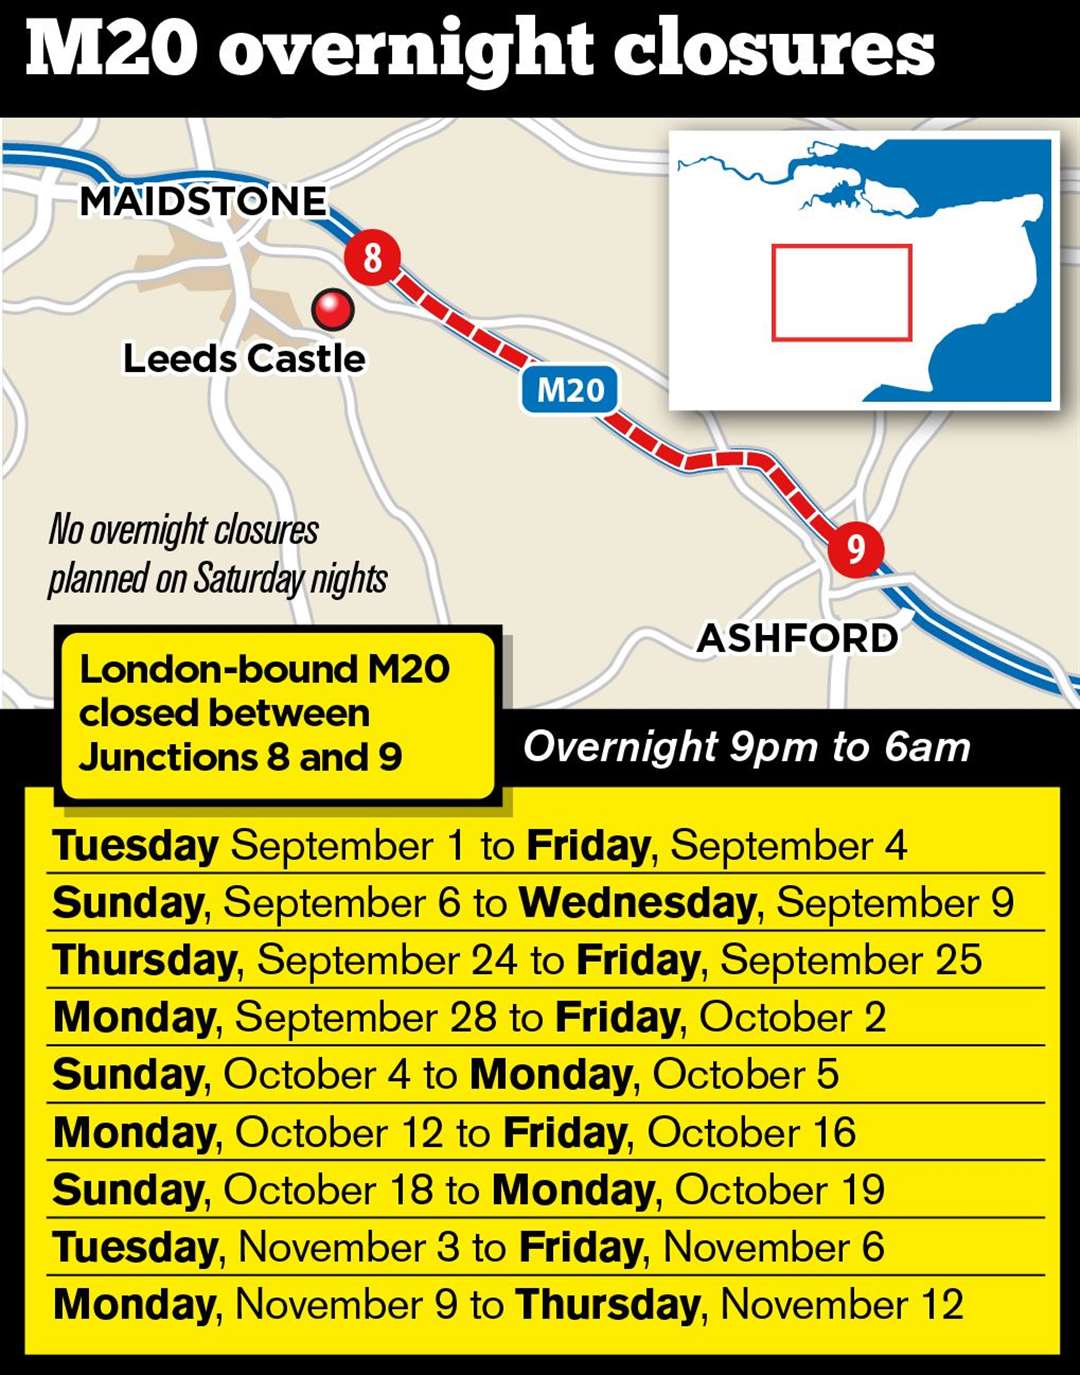 The London-bound M20 closures planned by Highways England